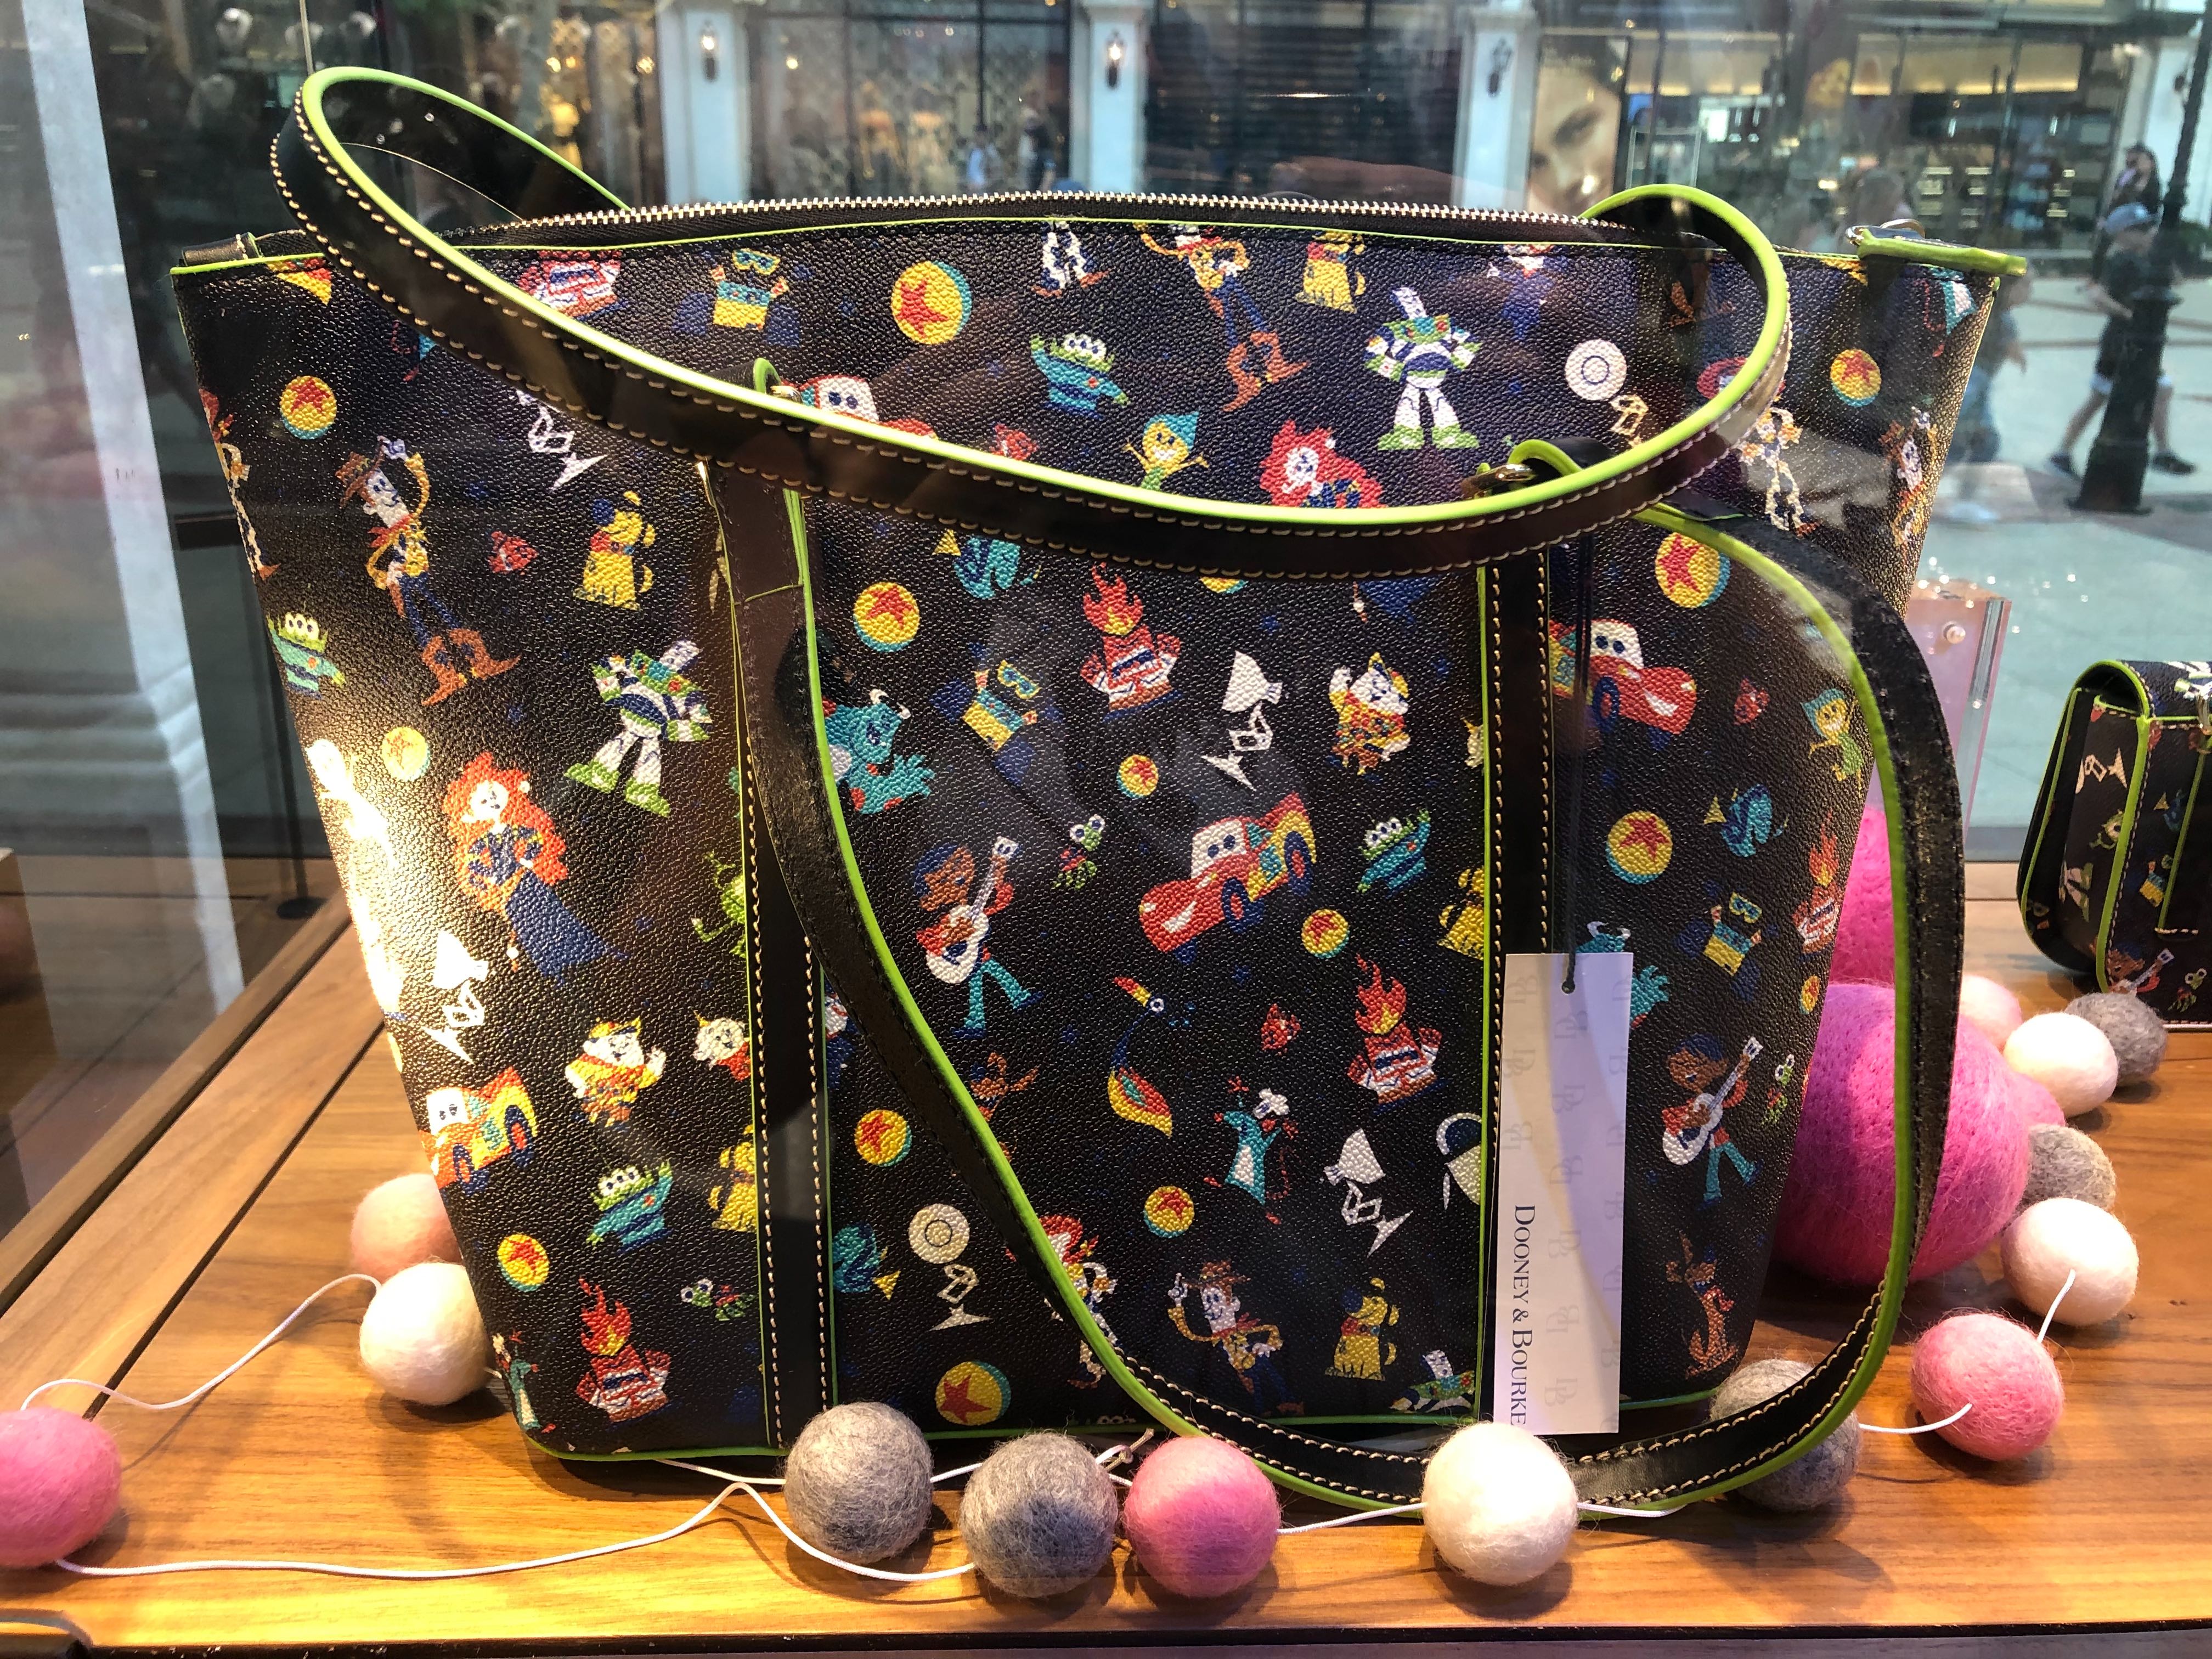 PHOTOS New “World of PIXAR” Dooney & Bourke Collection Coming Soon to